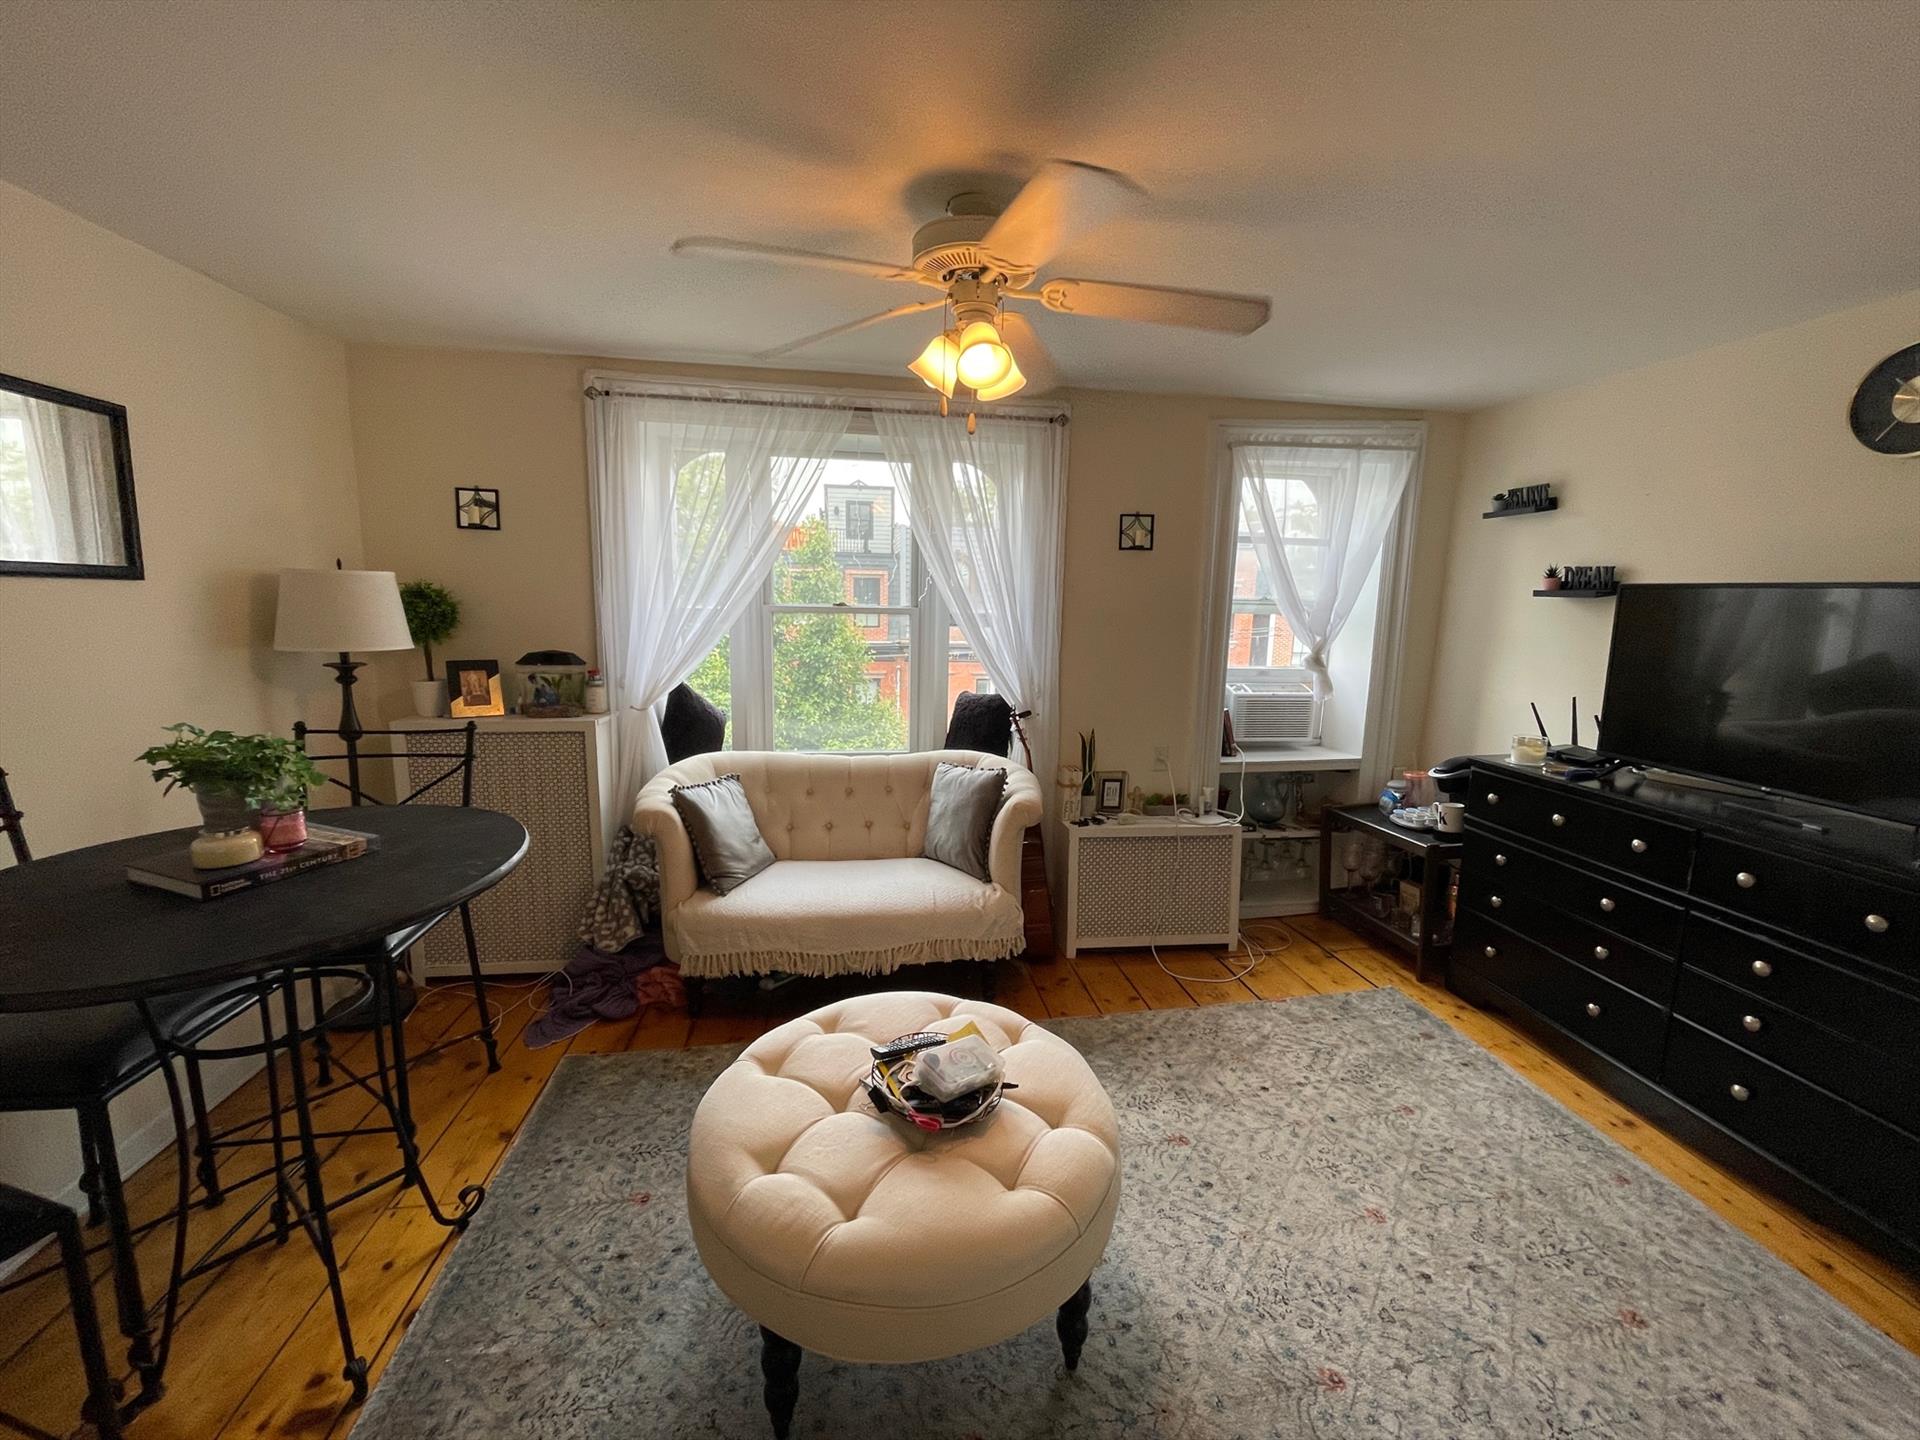 Fantastic deal 2 bed 1 bath apartment located on desirable Bloomfield street! This home features hardwood floors, a good size living area and good light. Both bedrooms will fit a queen and have a closet. Sorry no pets. One month broker fee. Available 7/15.